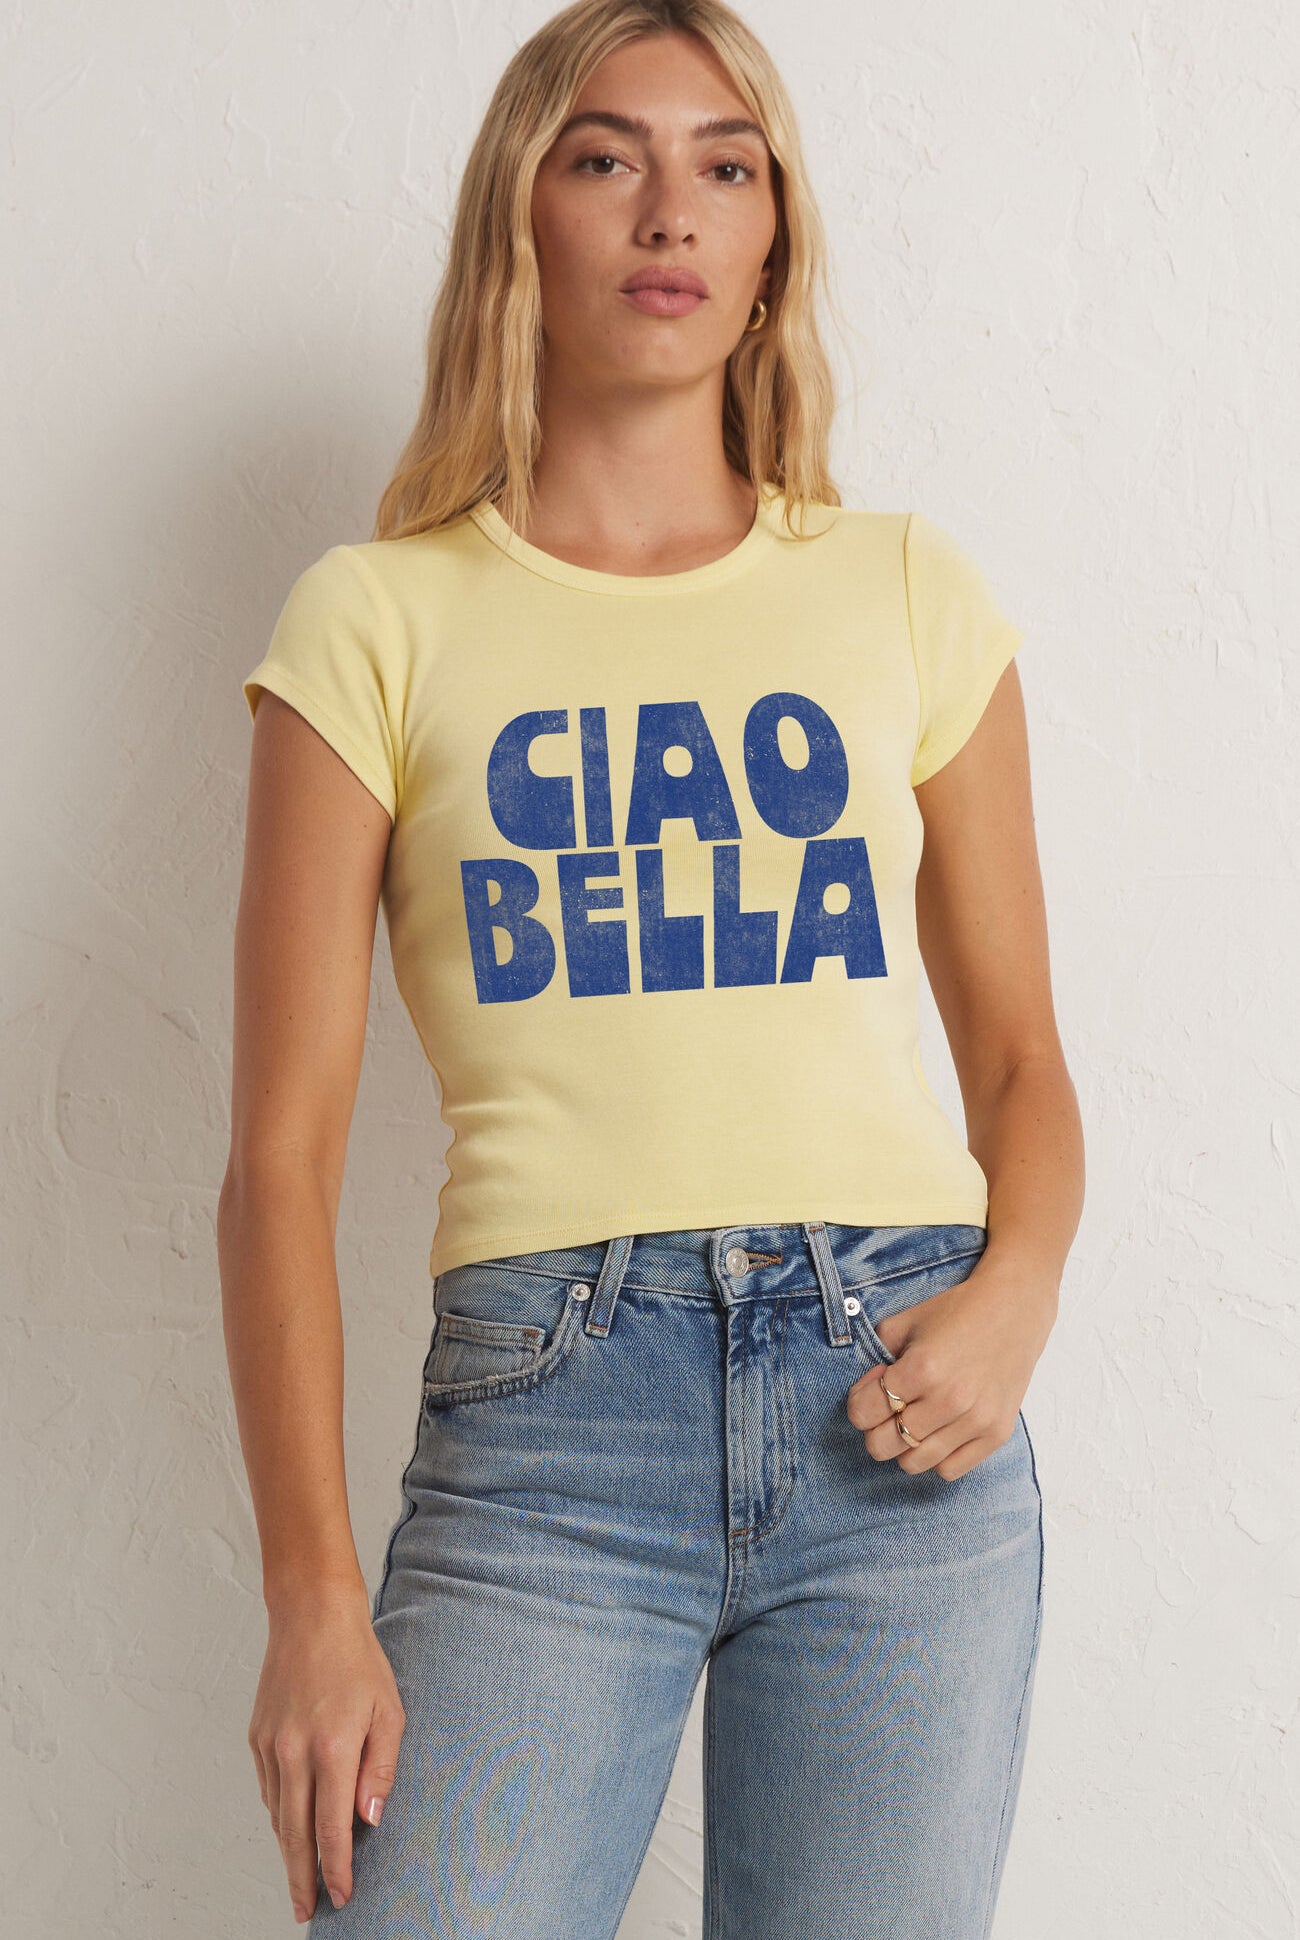 Ciao Cheeky Tee-Short Sleeves-Vixen Collection, Day Spa and Women's Boutique Located in Seattle, Washington